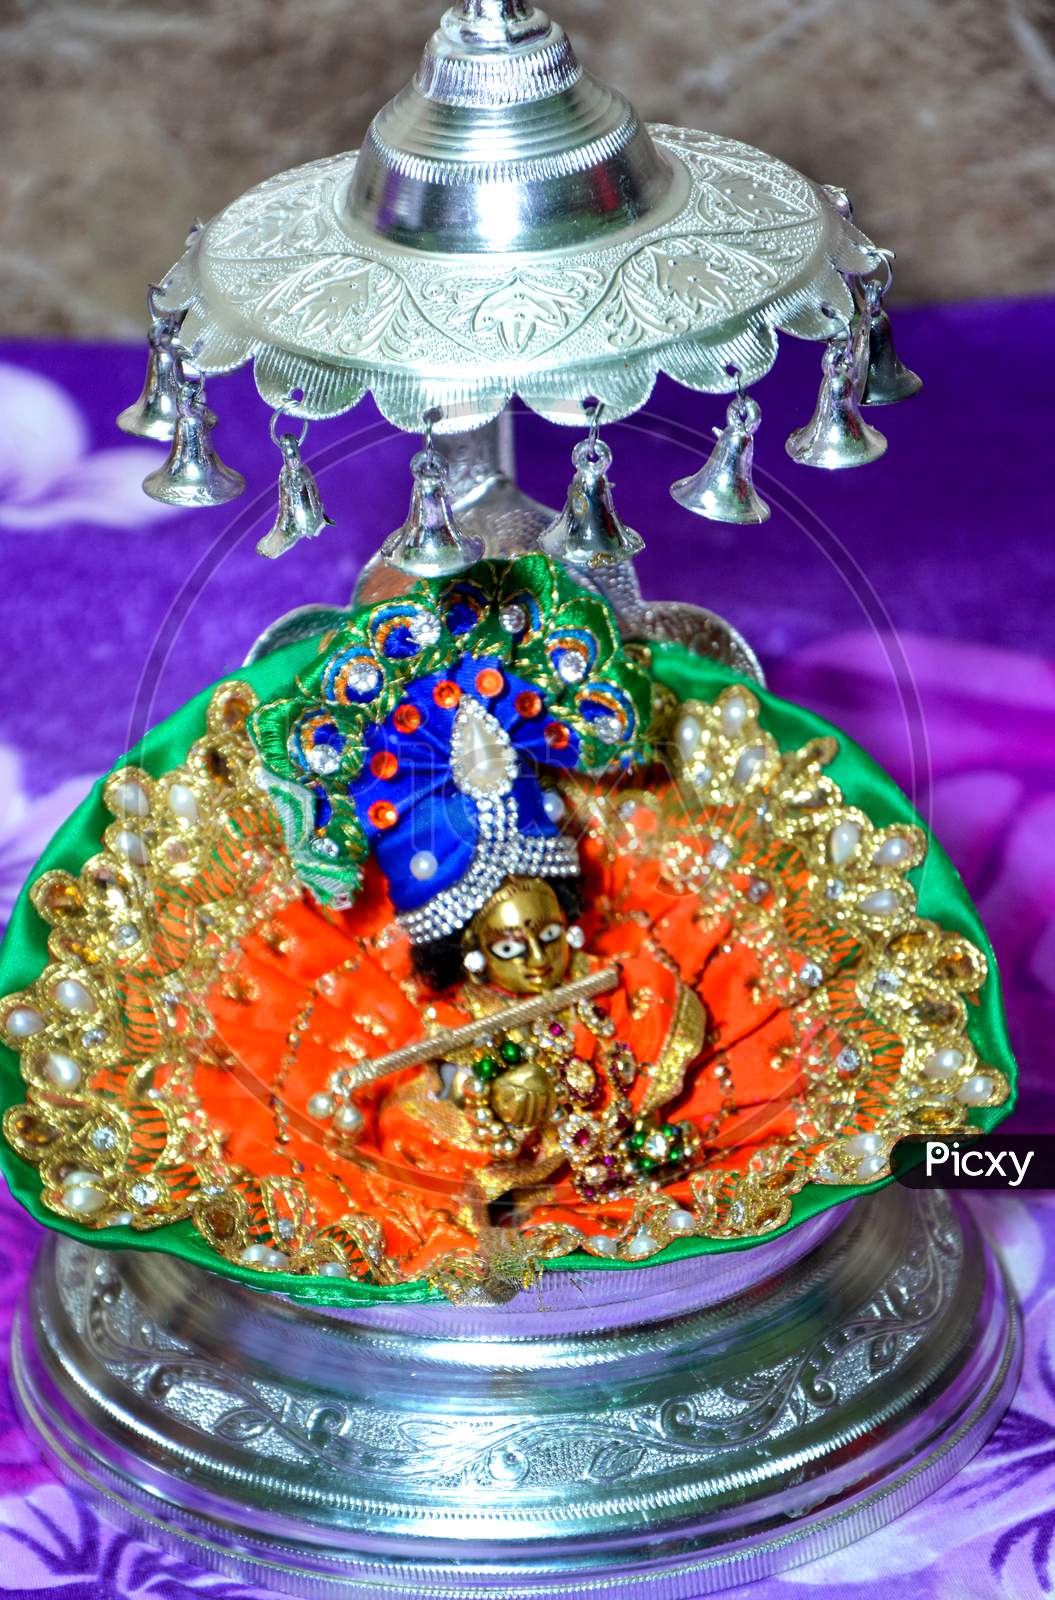 Lord Krishna Also Known As Laddu Gopal Sculpture In Beautiful Clothes Close Up